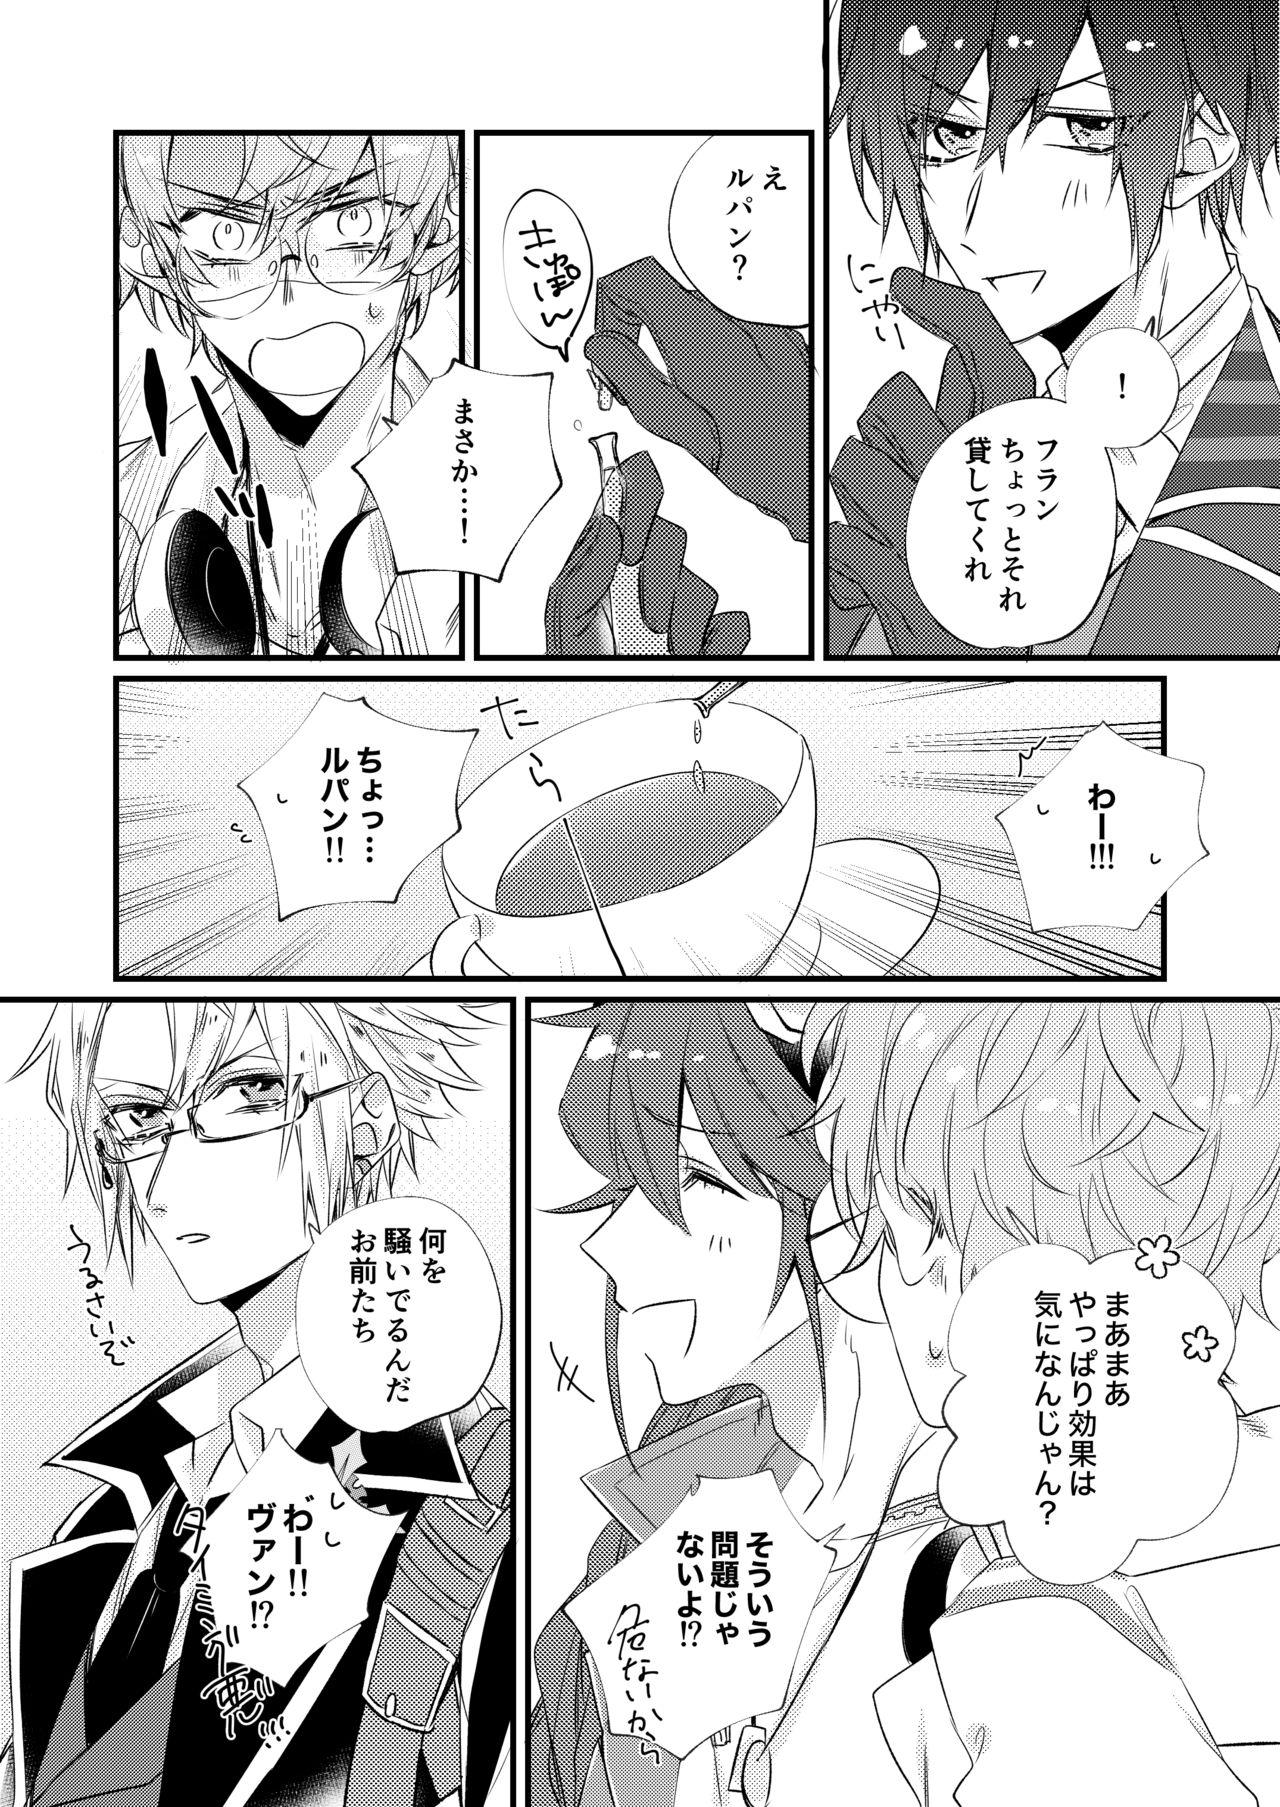 18yearsold 熱におぼれる - Code realize sousei no himegimi Curves - Page 5